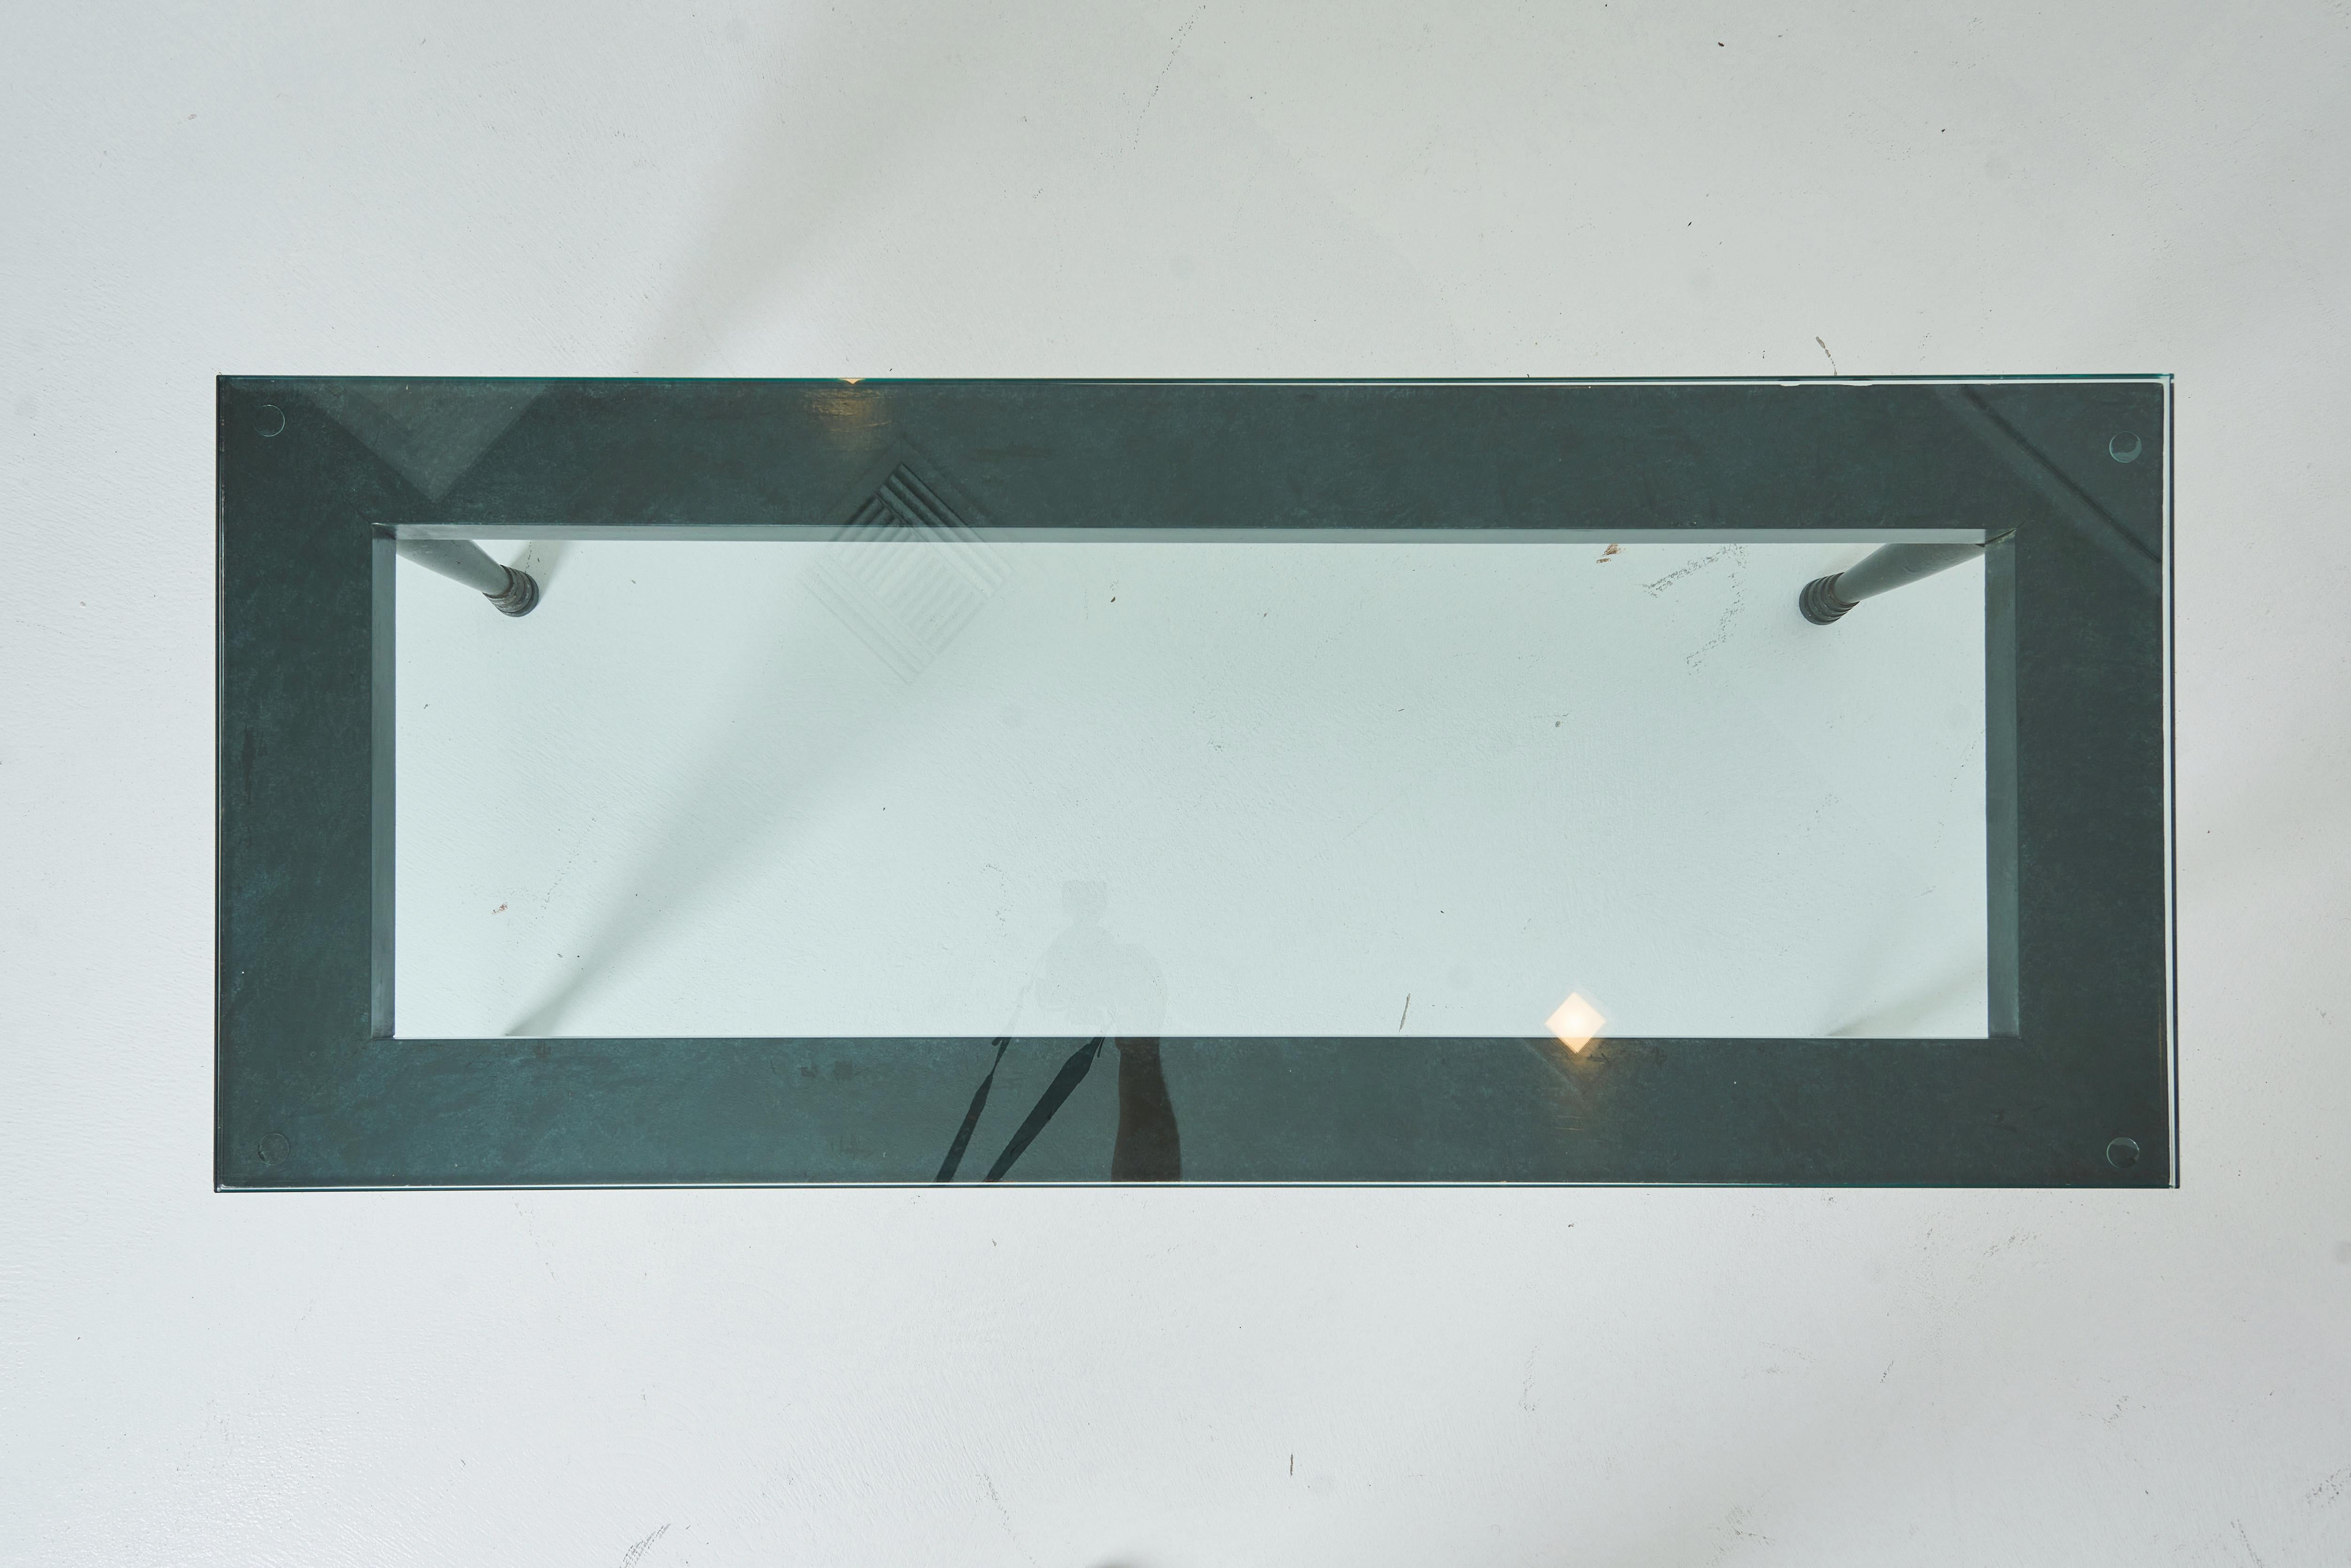 This cocktail table is a variation on an often used Haines design.  The legs are cast aluminum and fixed to wood surround that supports the glass top.  The table has a signature Haines painted finish resembling verdigris metal.  the glass top keeps